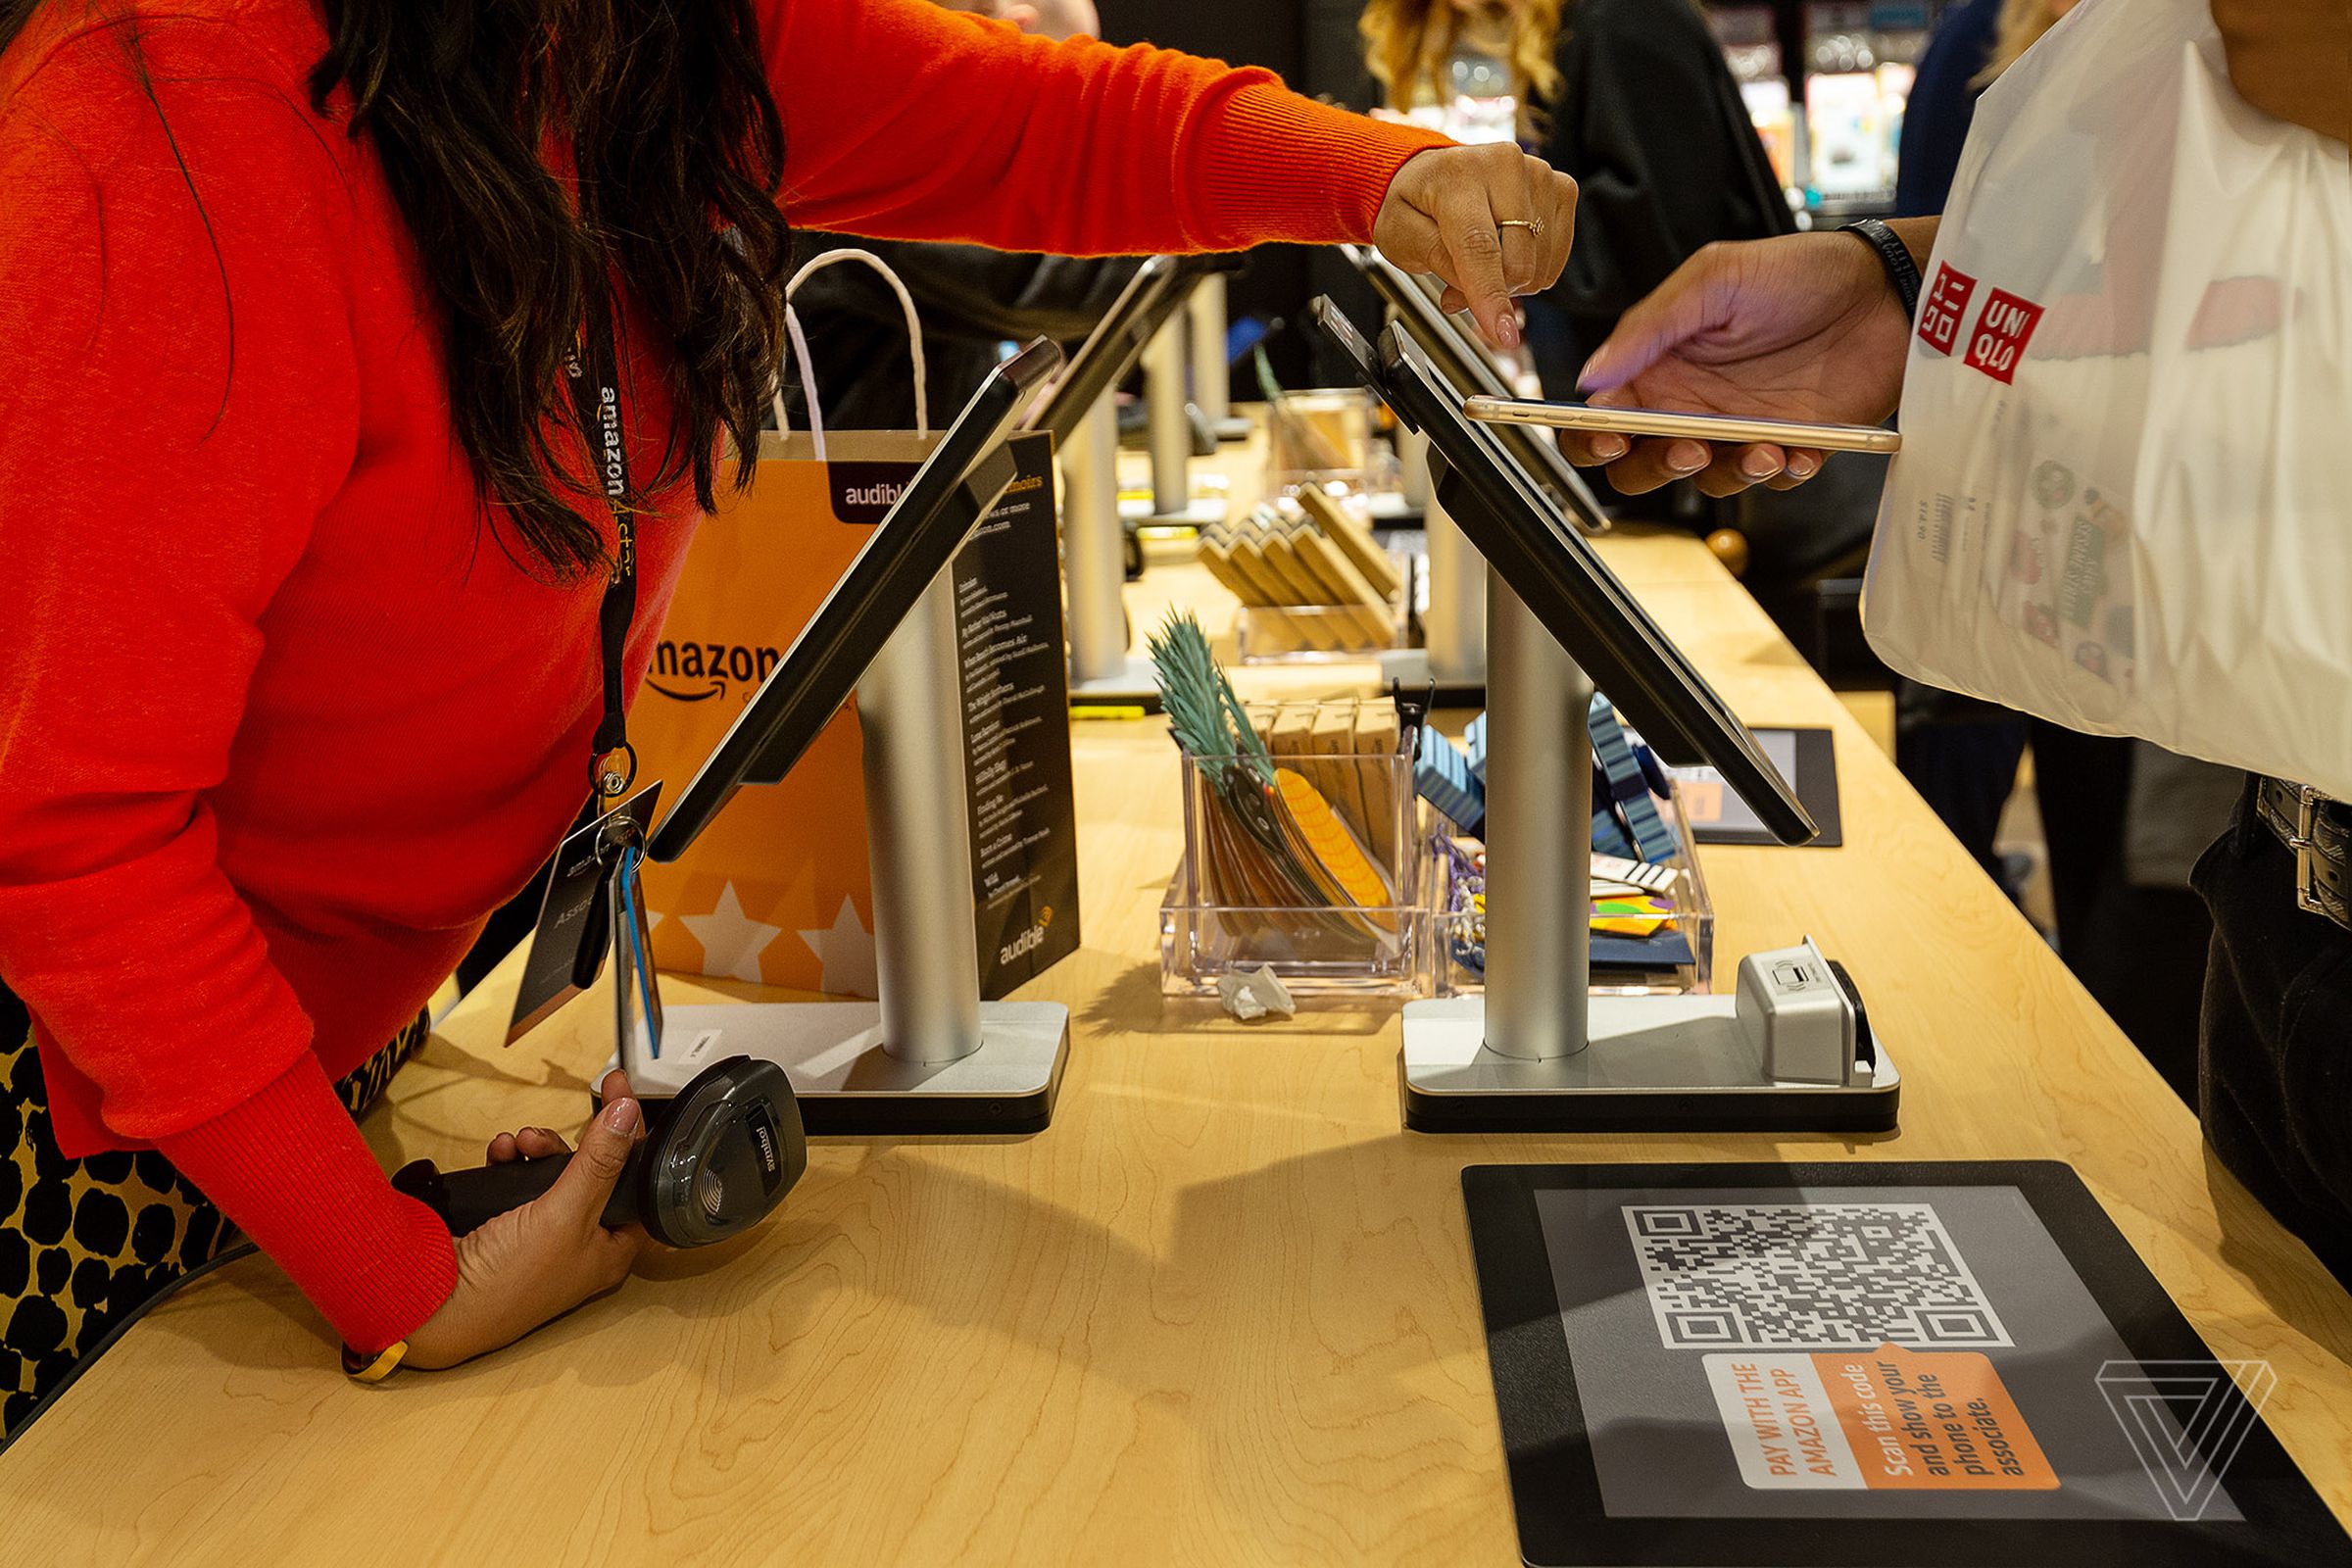 Opening day at the Amazon 4-Star brick-and-mortar store located in New York City. The cashless enterprise offers a variety of items that have been rated 4-stars or higher.